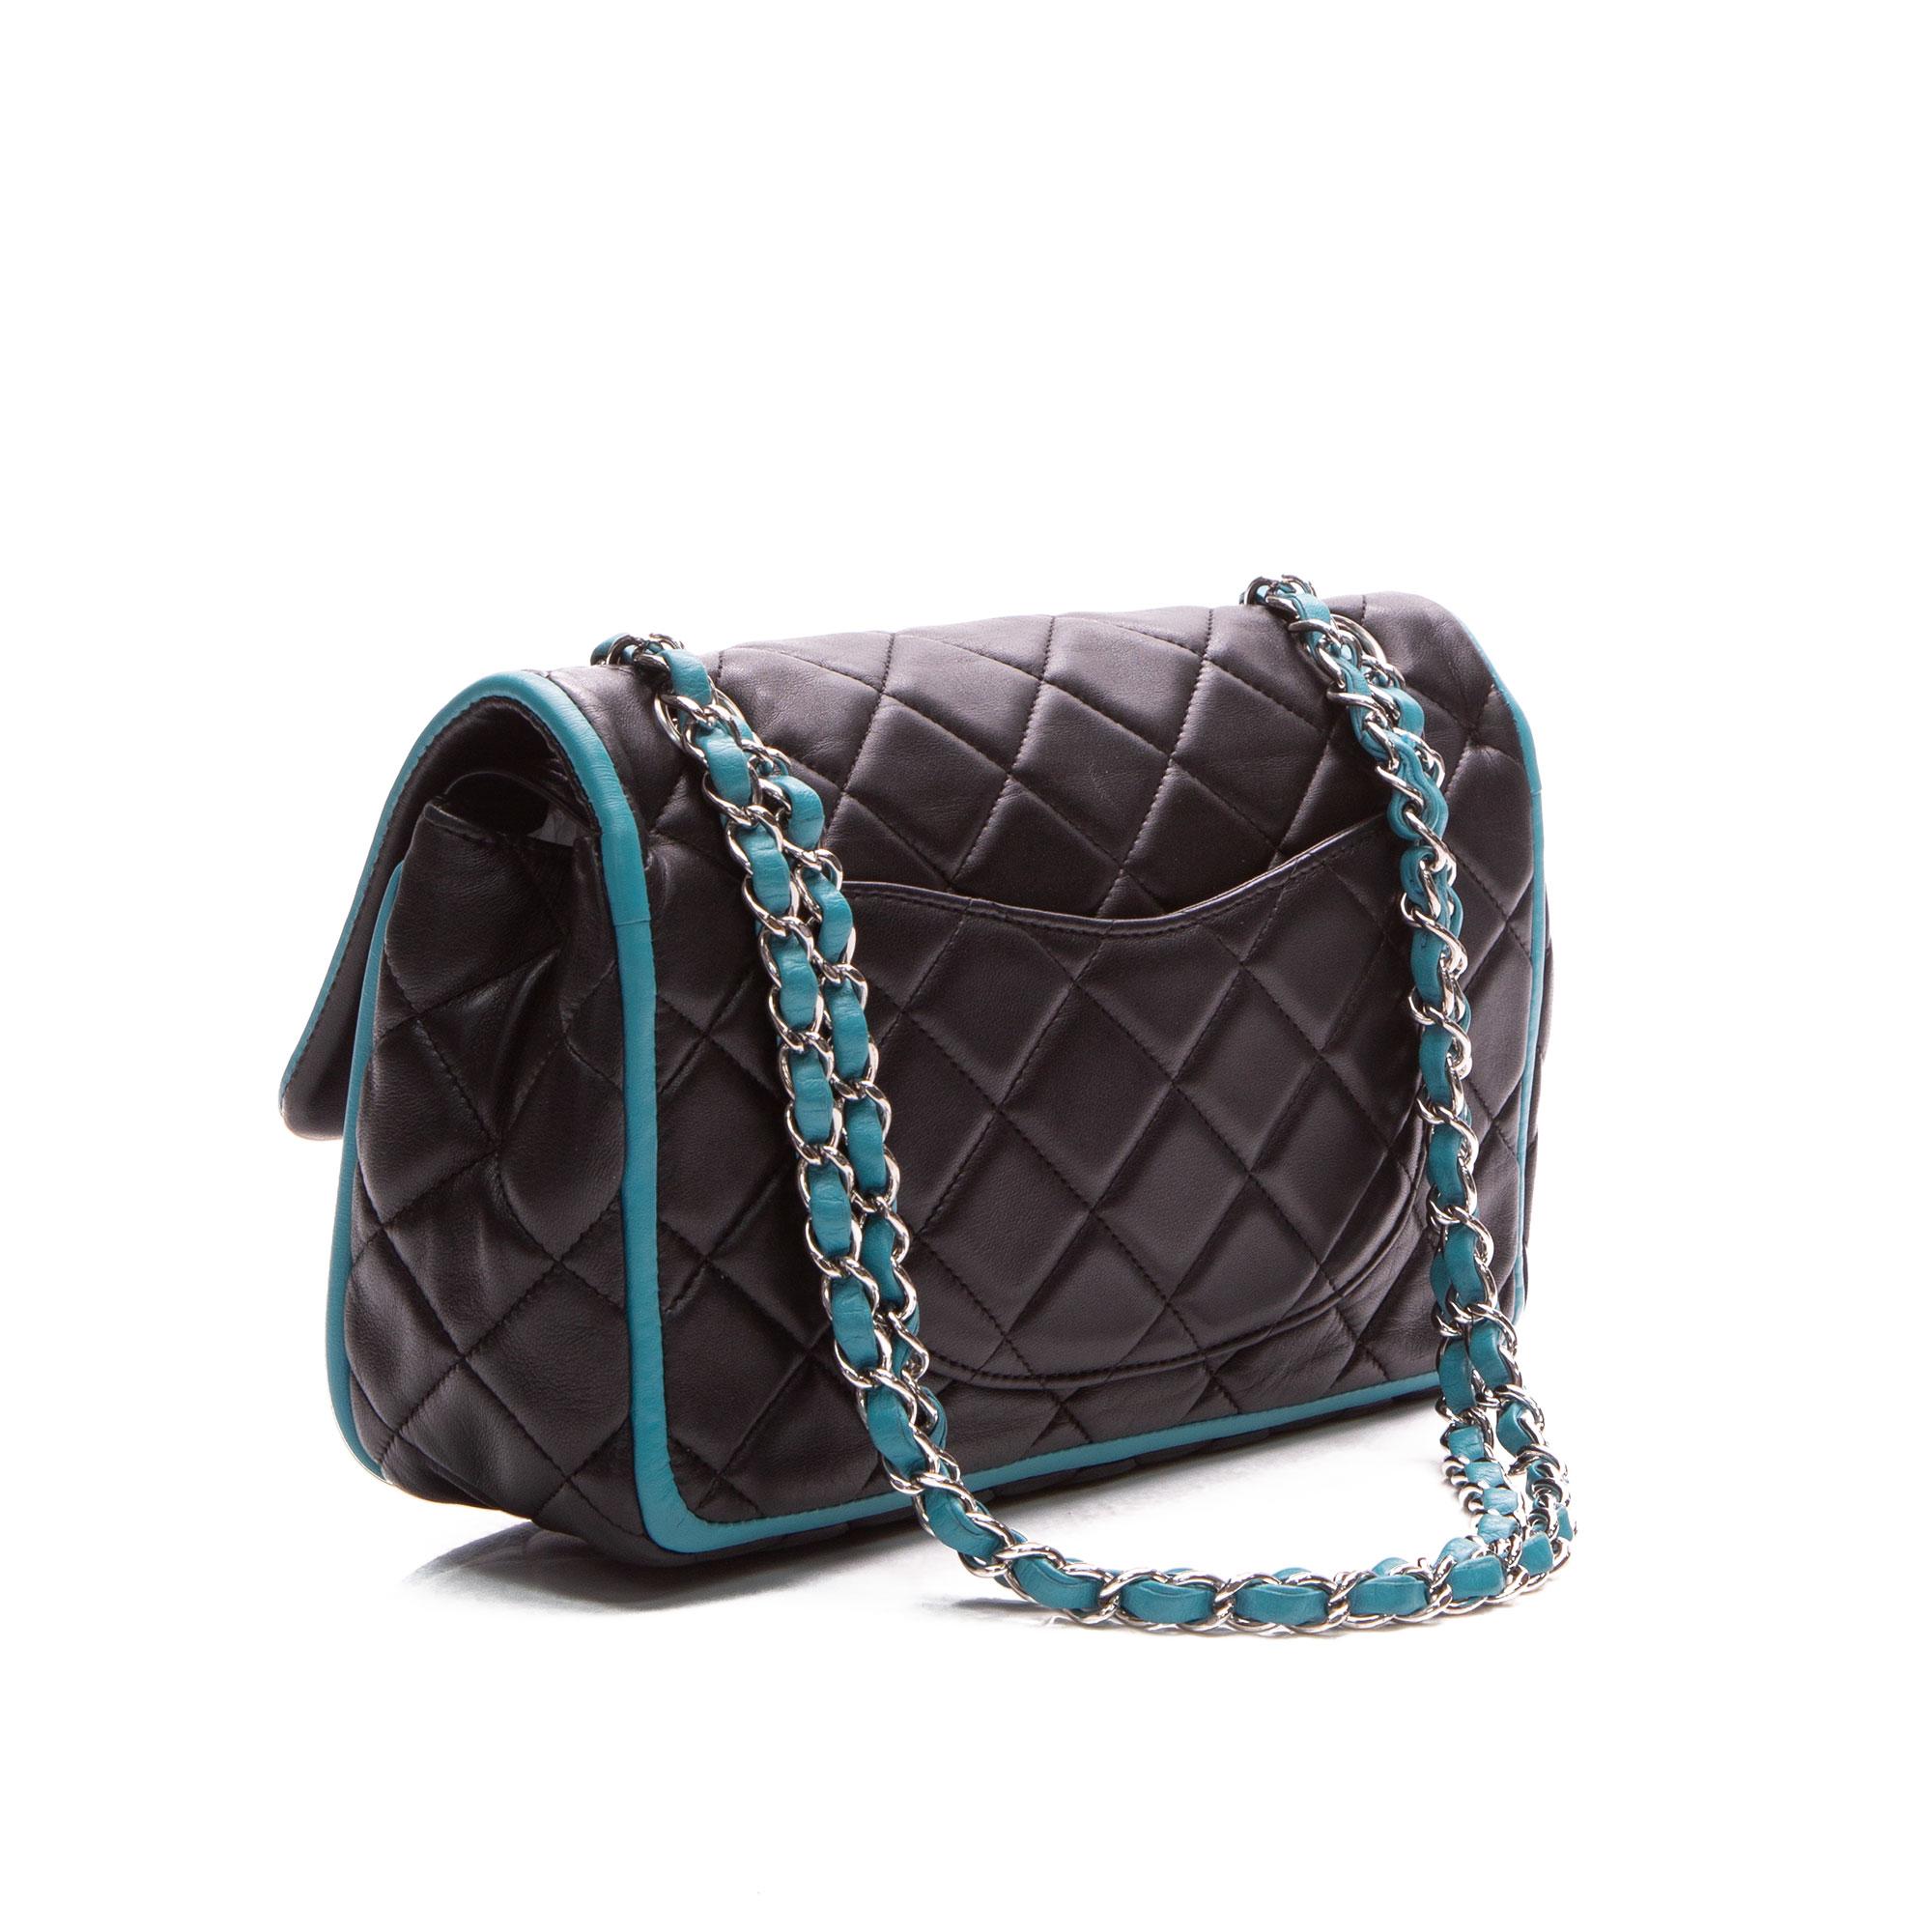 Chanel 2006 Medium Double Classic Flap in Black Lambskin Turquoise Piping Bag 5